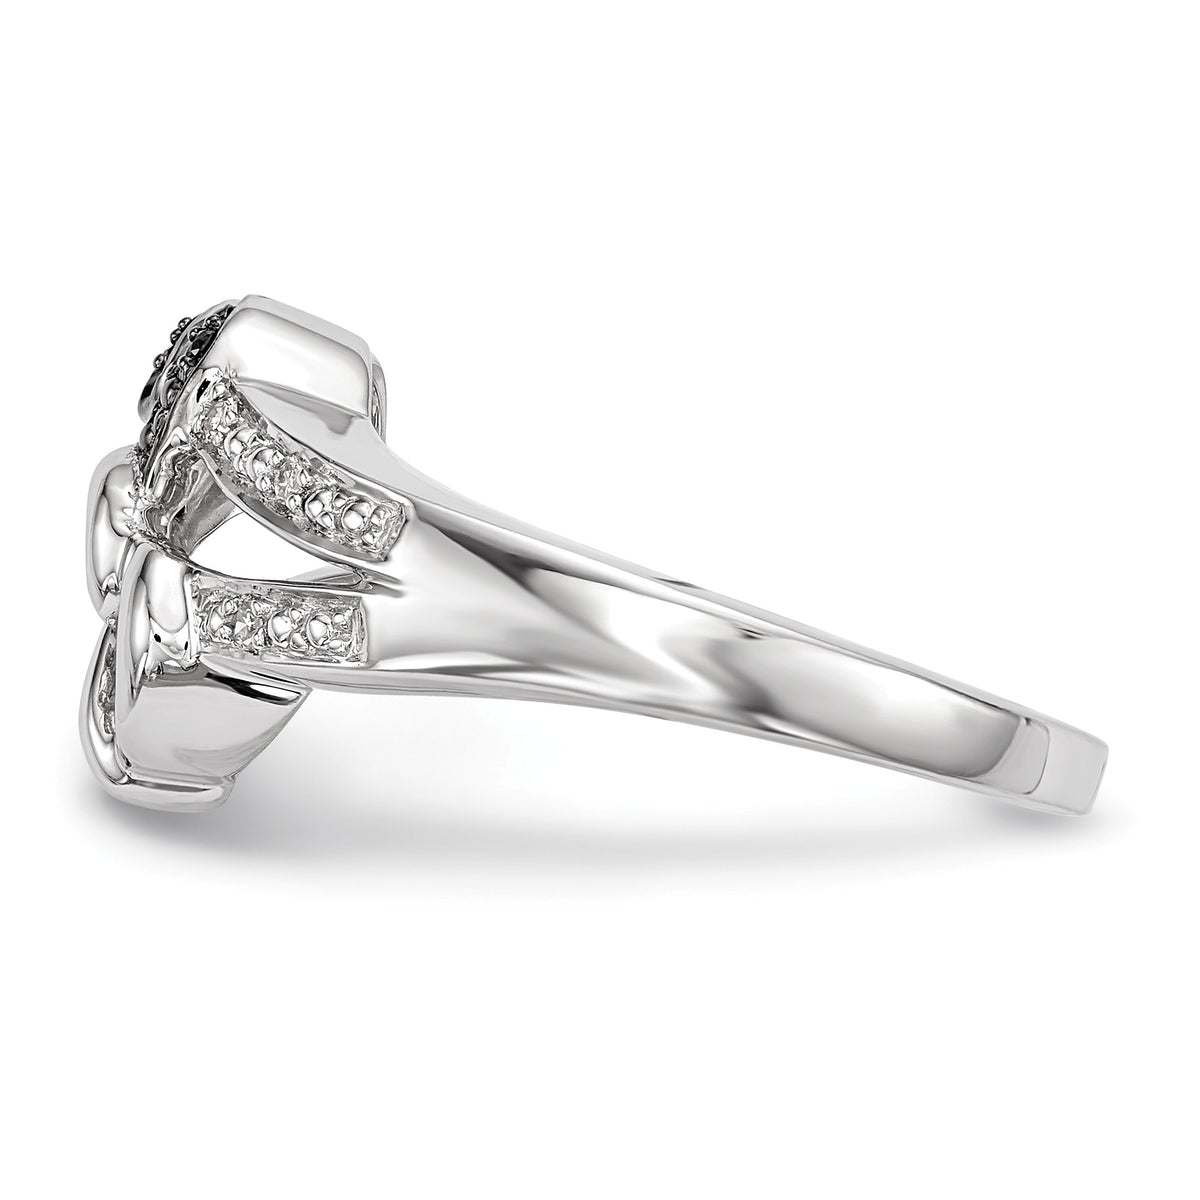 Alternate view of the Black &amp; White Diamond Double Heart Tapered Ring in Sterling Silver by The Black Bow Jewelry Co.